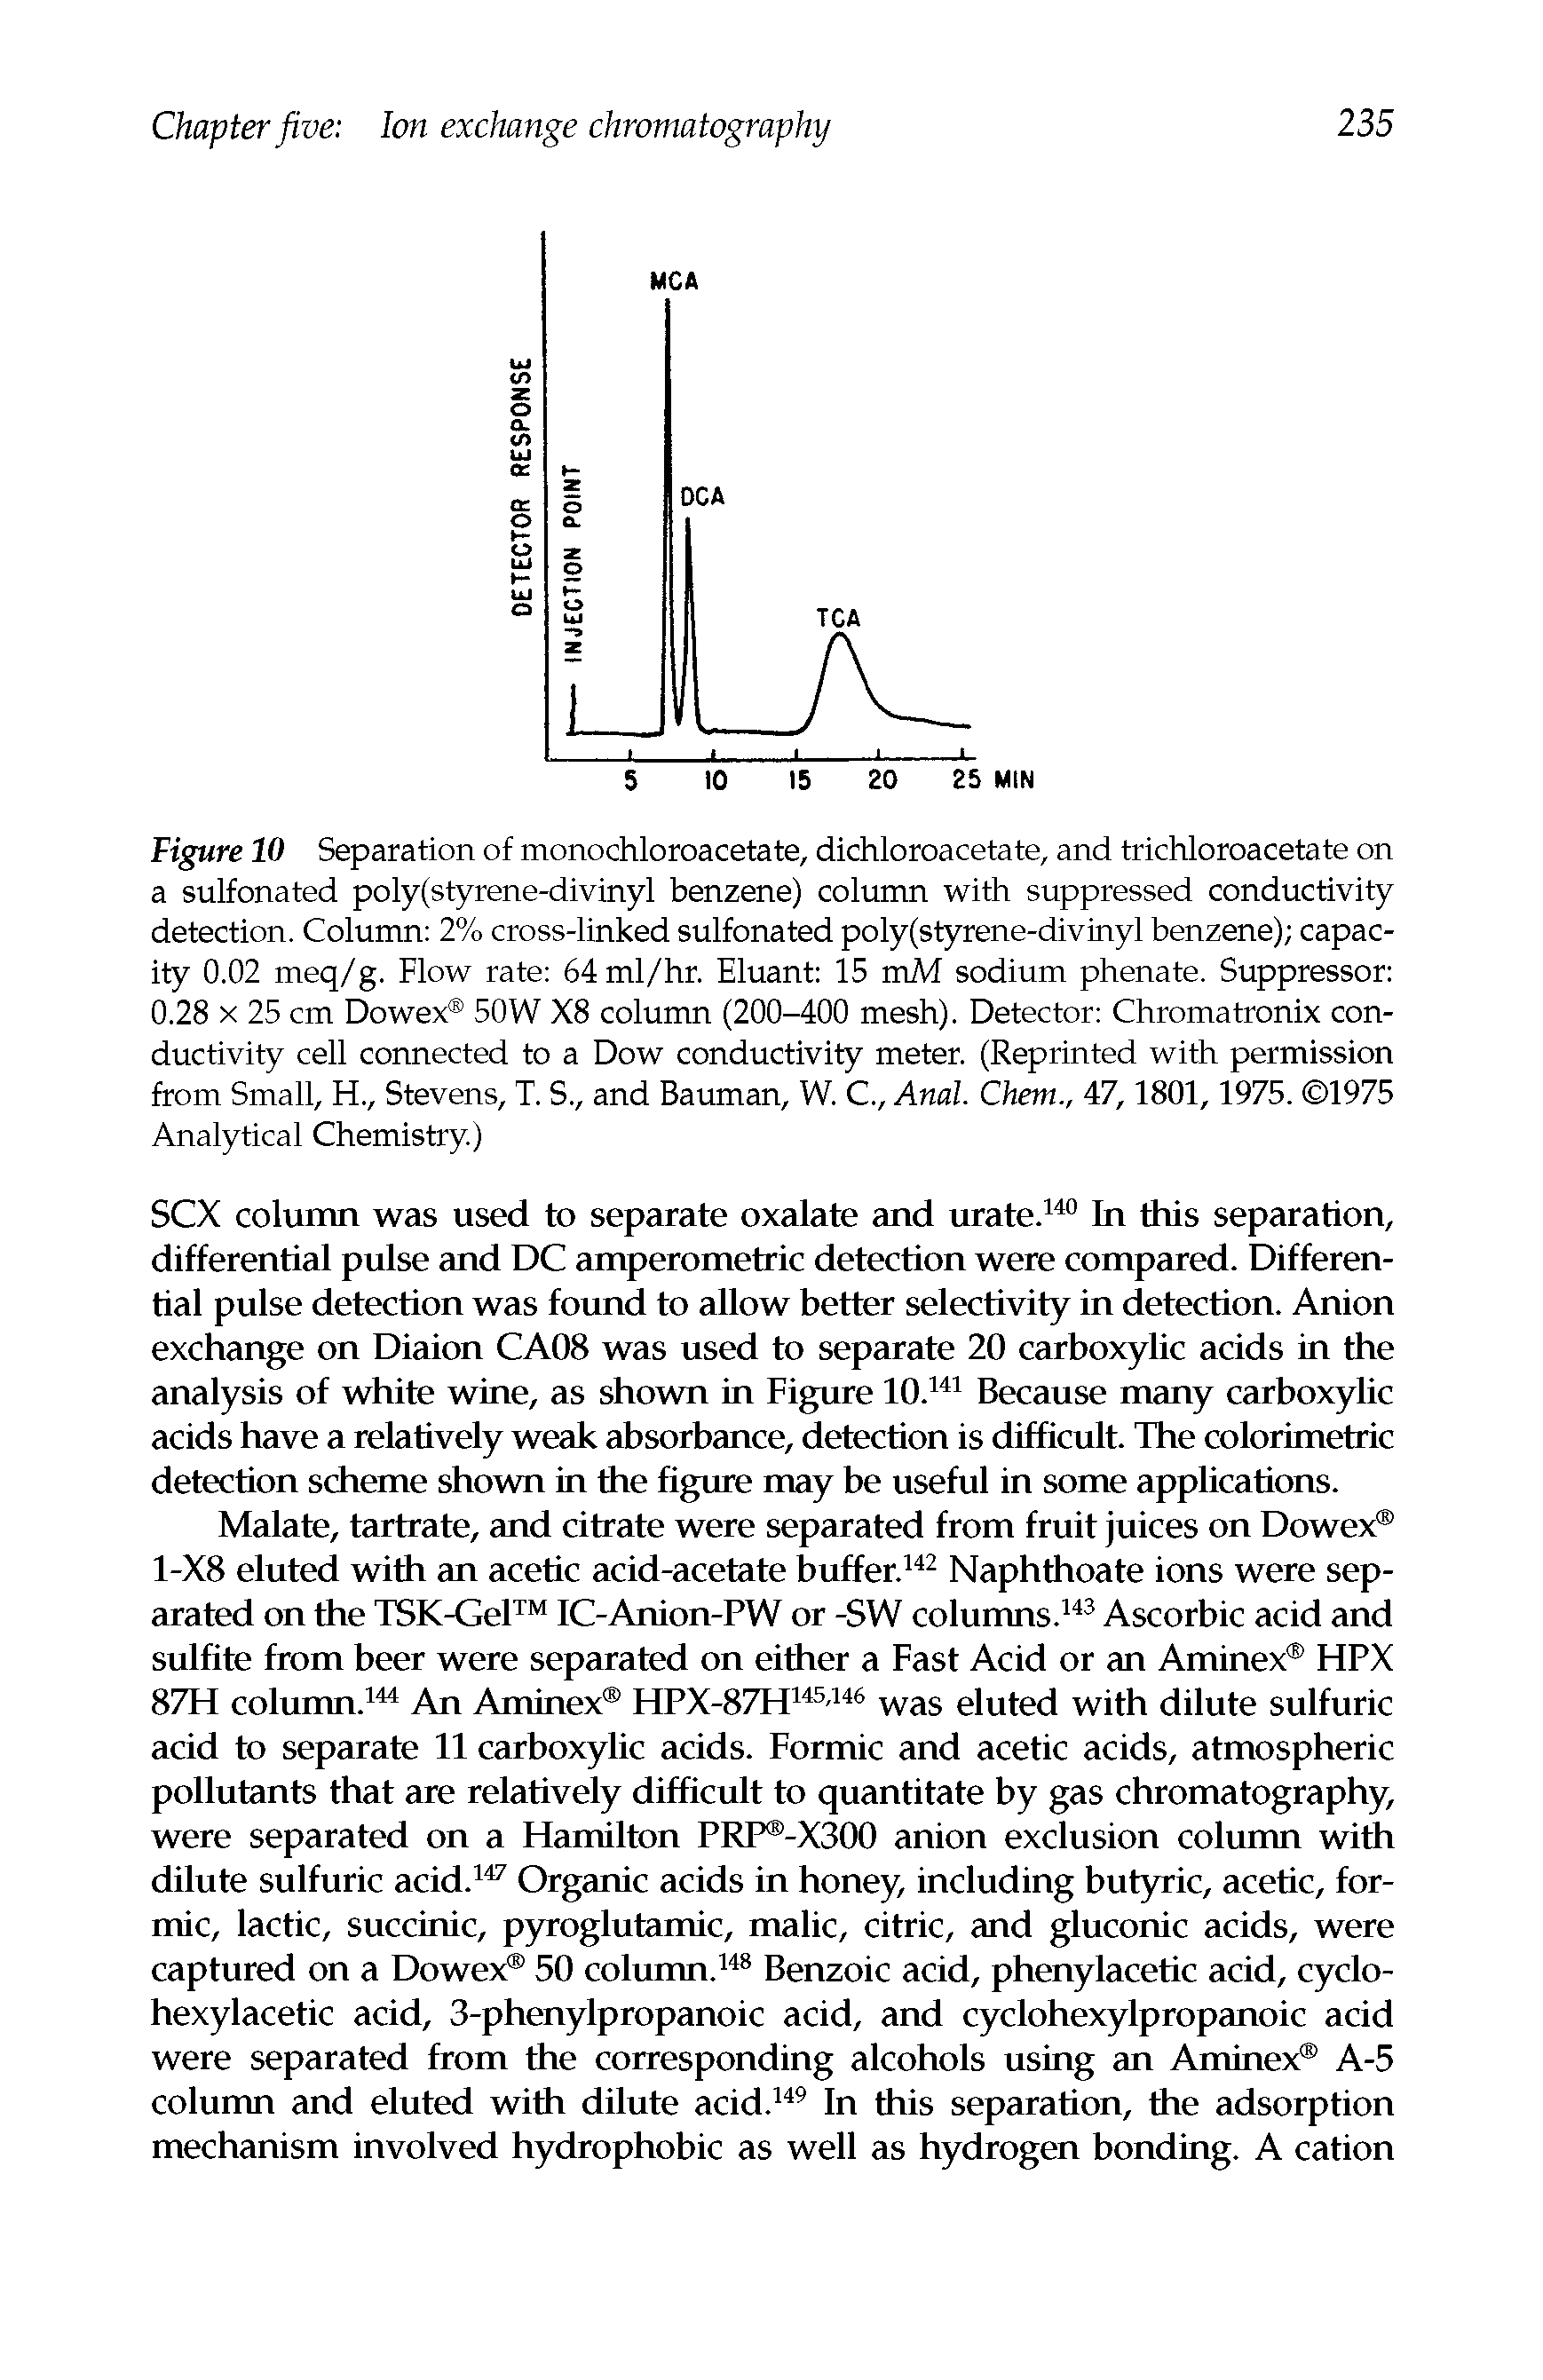 Figure 10 Separation of monochloroacetate, dichloroacetate, and trichloroacetate on a sulfonated poly(styrene-divinyl benzene) column with suppressed conductivity detection. Column 2% cross-linked sulfonated poly(styrene-divinyl benzene) capacity 0.02 meq/g. Flow rate 64 ml/hr. Eluant 15 mM sodium phenate. Suppressor 0.28 x 25 cm Dowex 50W X8 column (200-400 mesh). Detector Chromatronix conductivity cell connected to a Dow conductivity meter. (Reprinted with permission from Small, H., Stevens, T. S., and Bauman, W. C., Anal. Chem., 47,1801,1975. 1975 Analytical Chemistry.)...